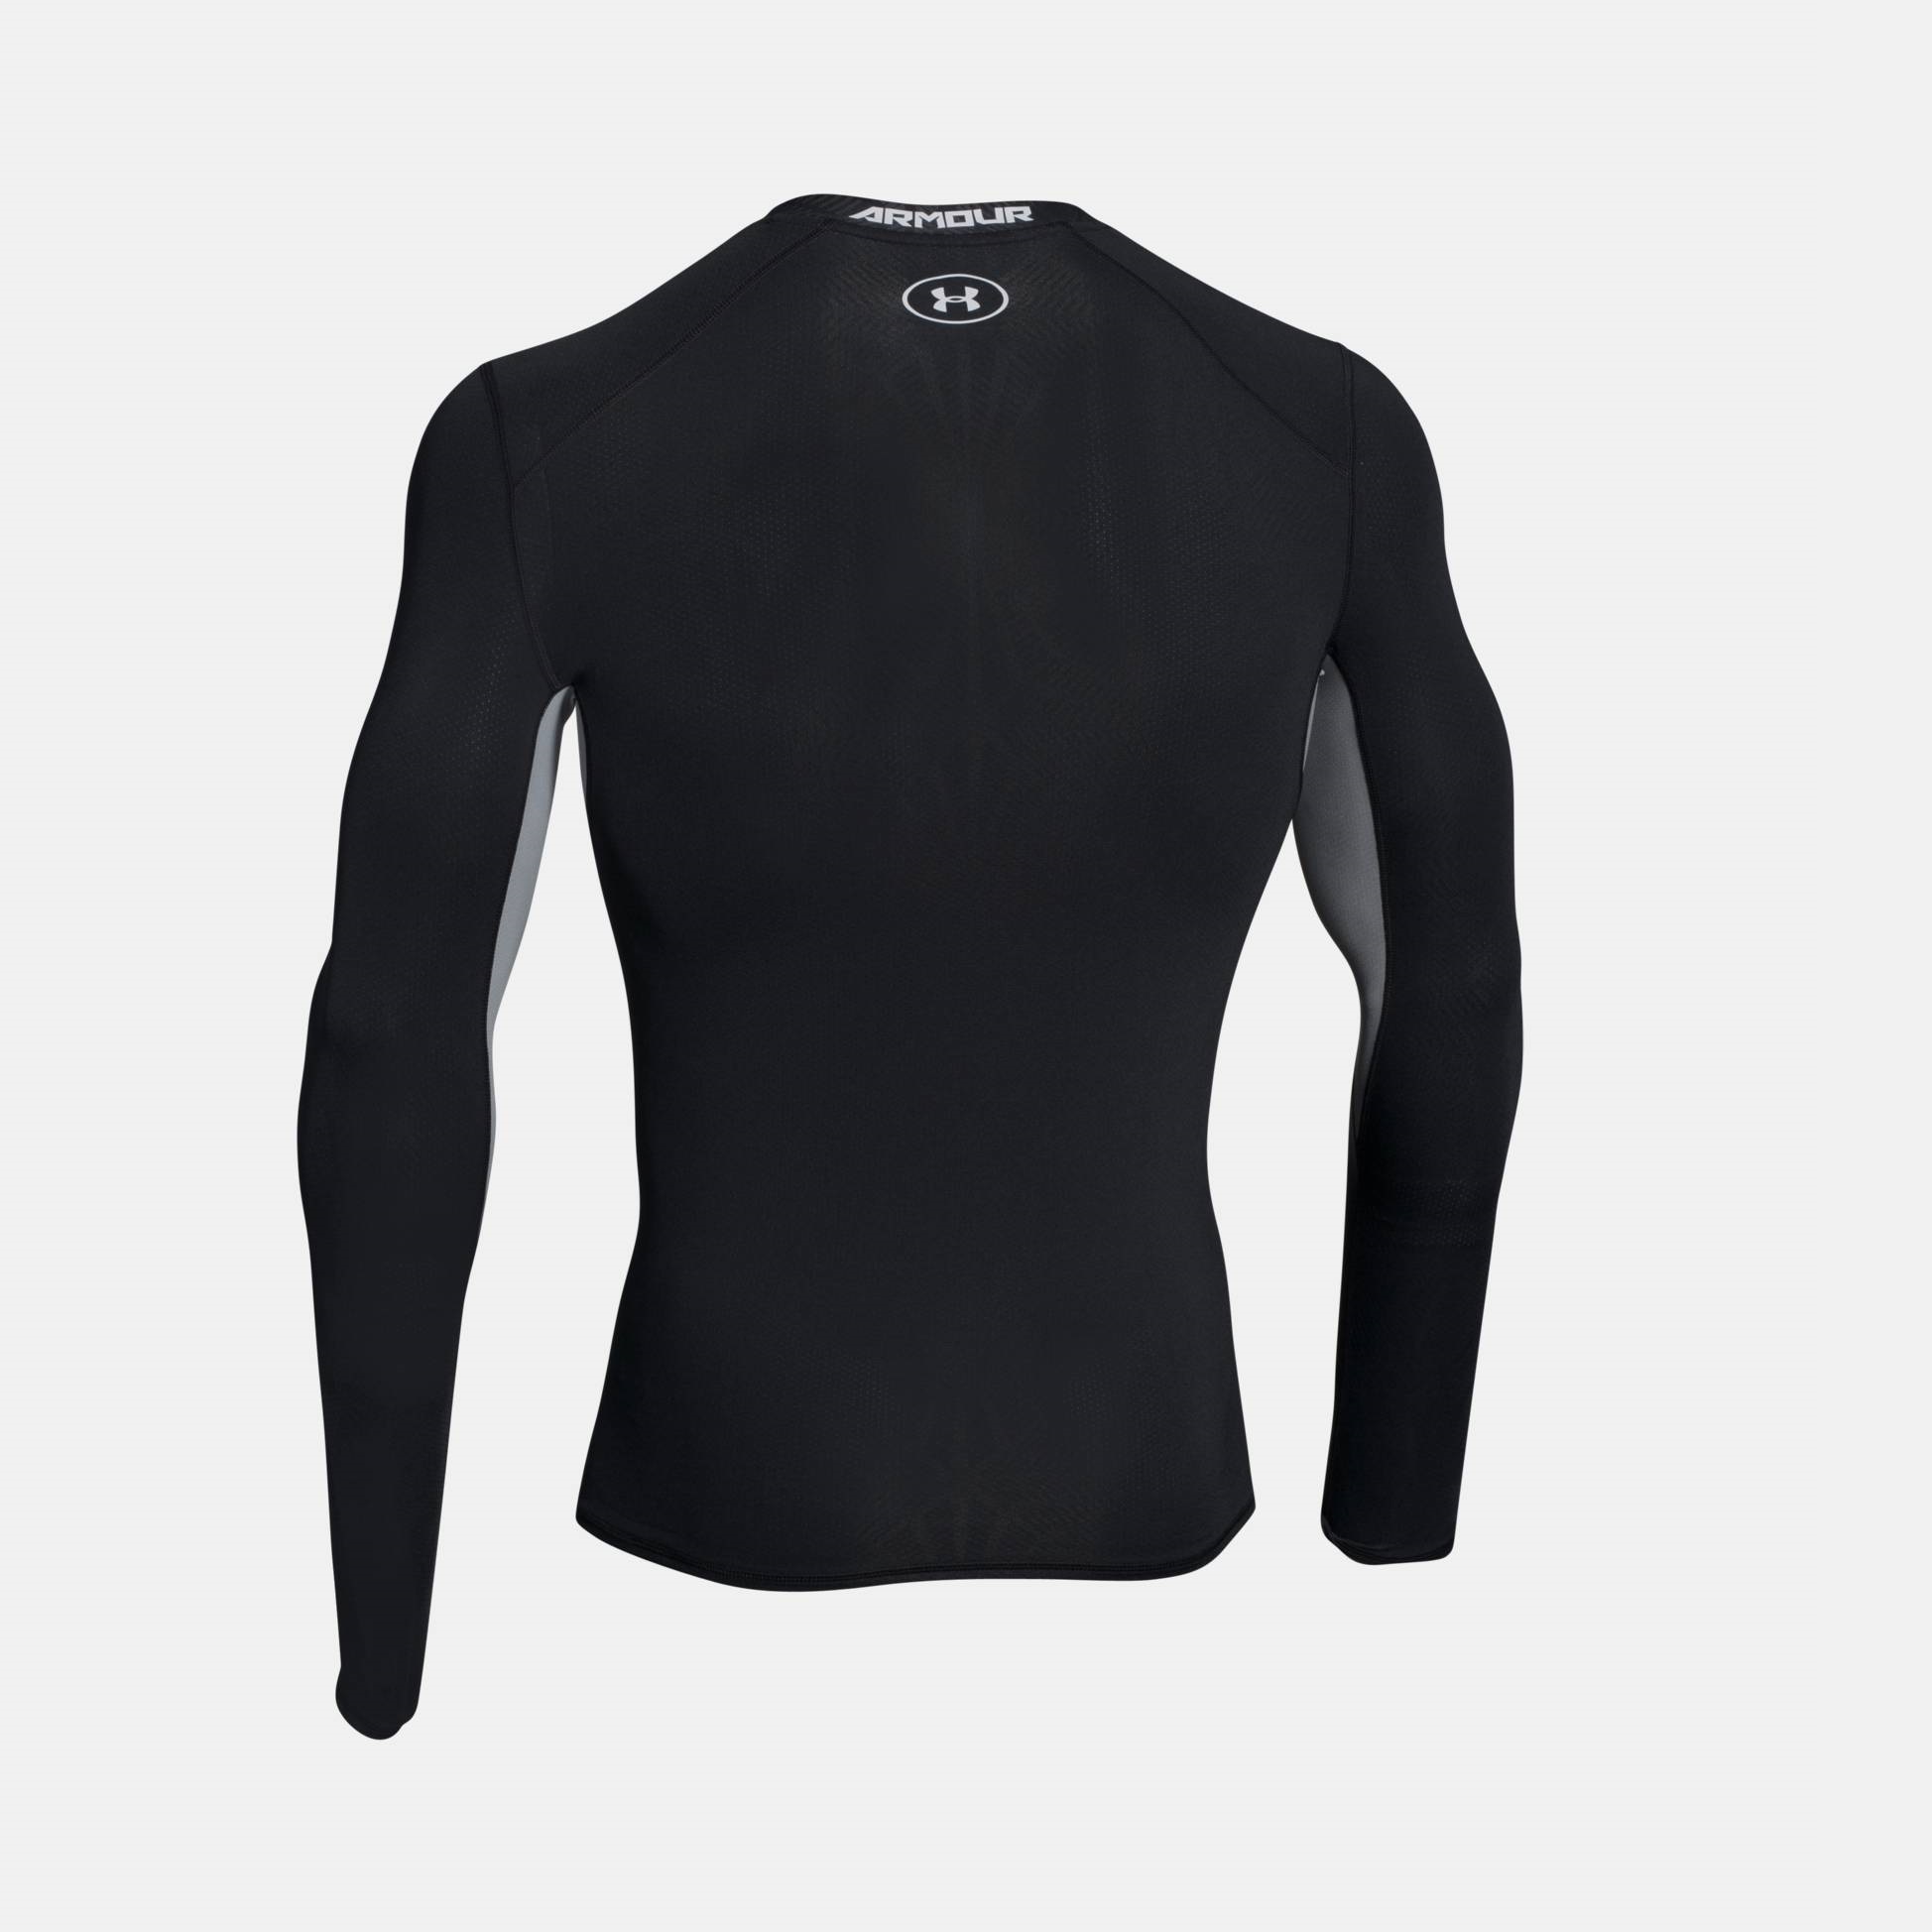 https://img2.sportconcept.com/backend_nou/content/images/fitness-coolswitch-compression-shirt-20160905170939.jpg